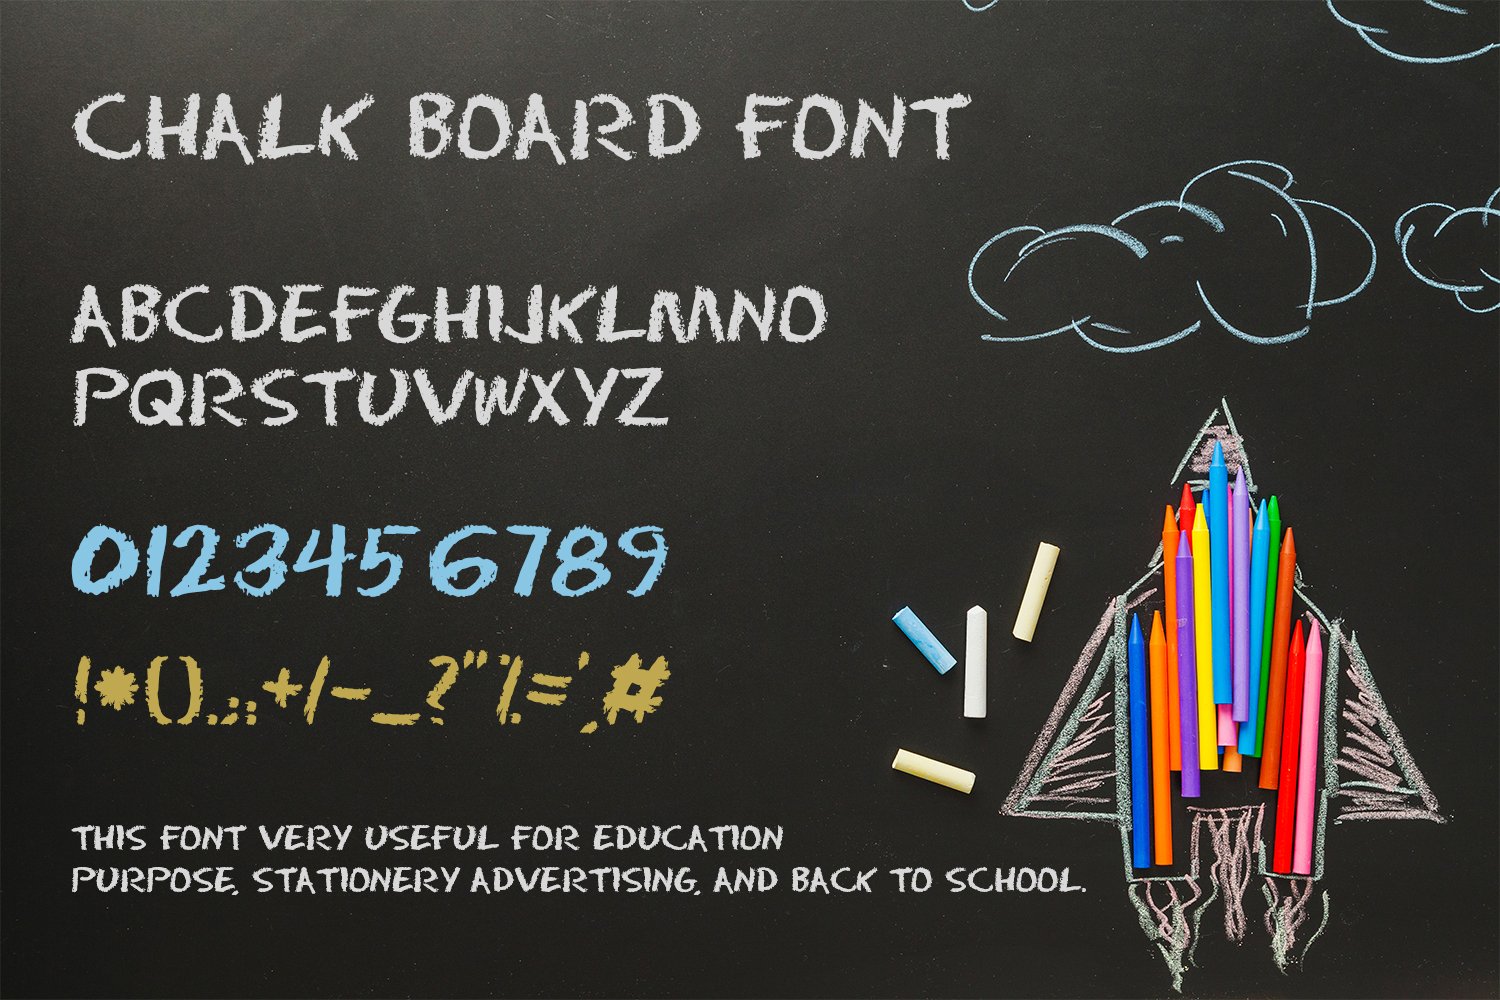 Chalk Board Font cover image.